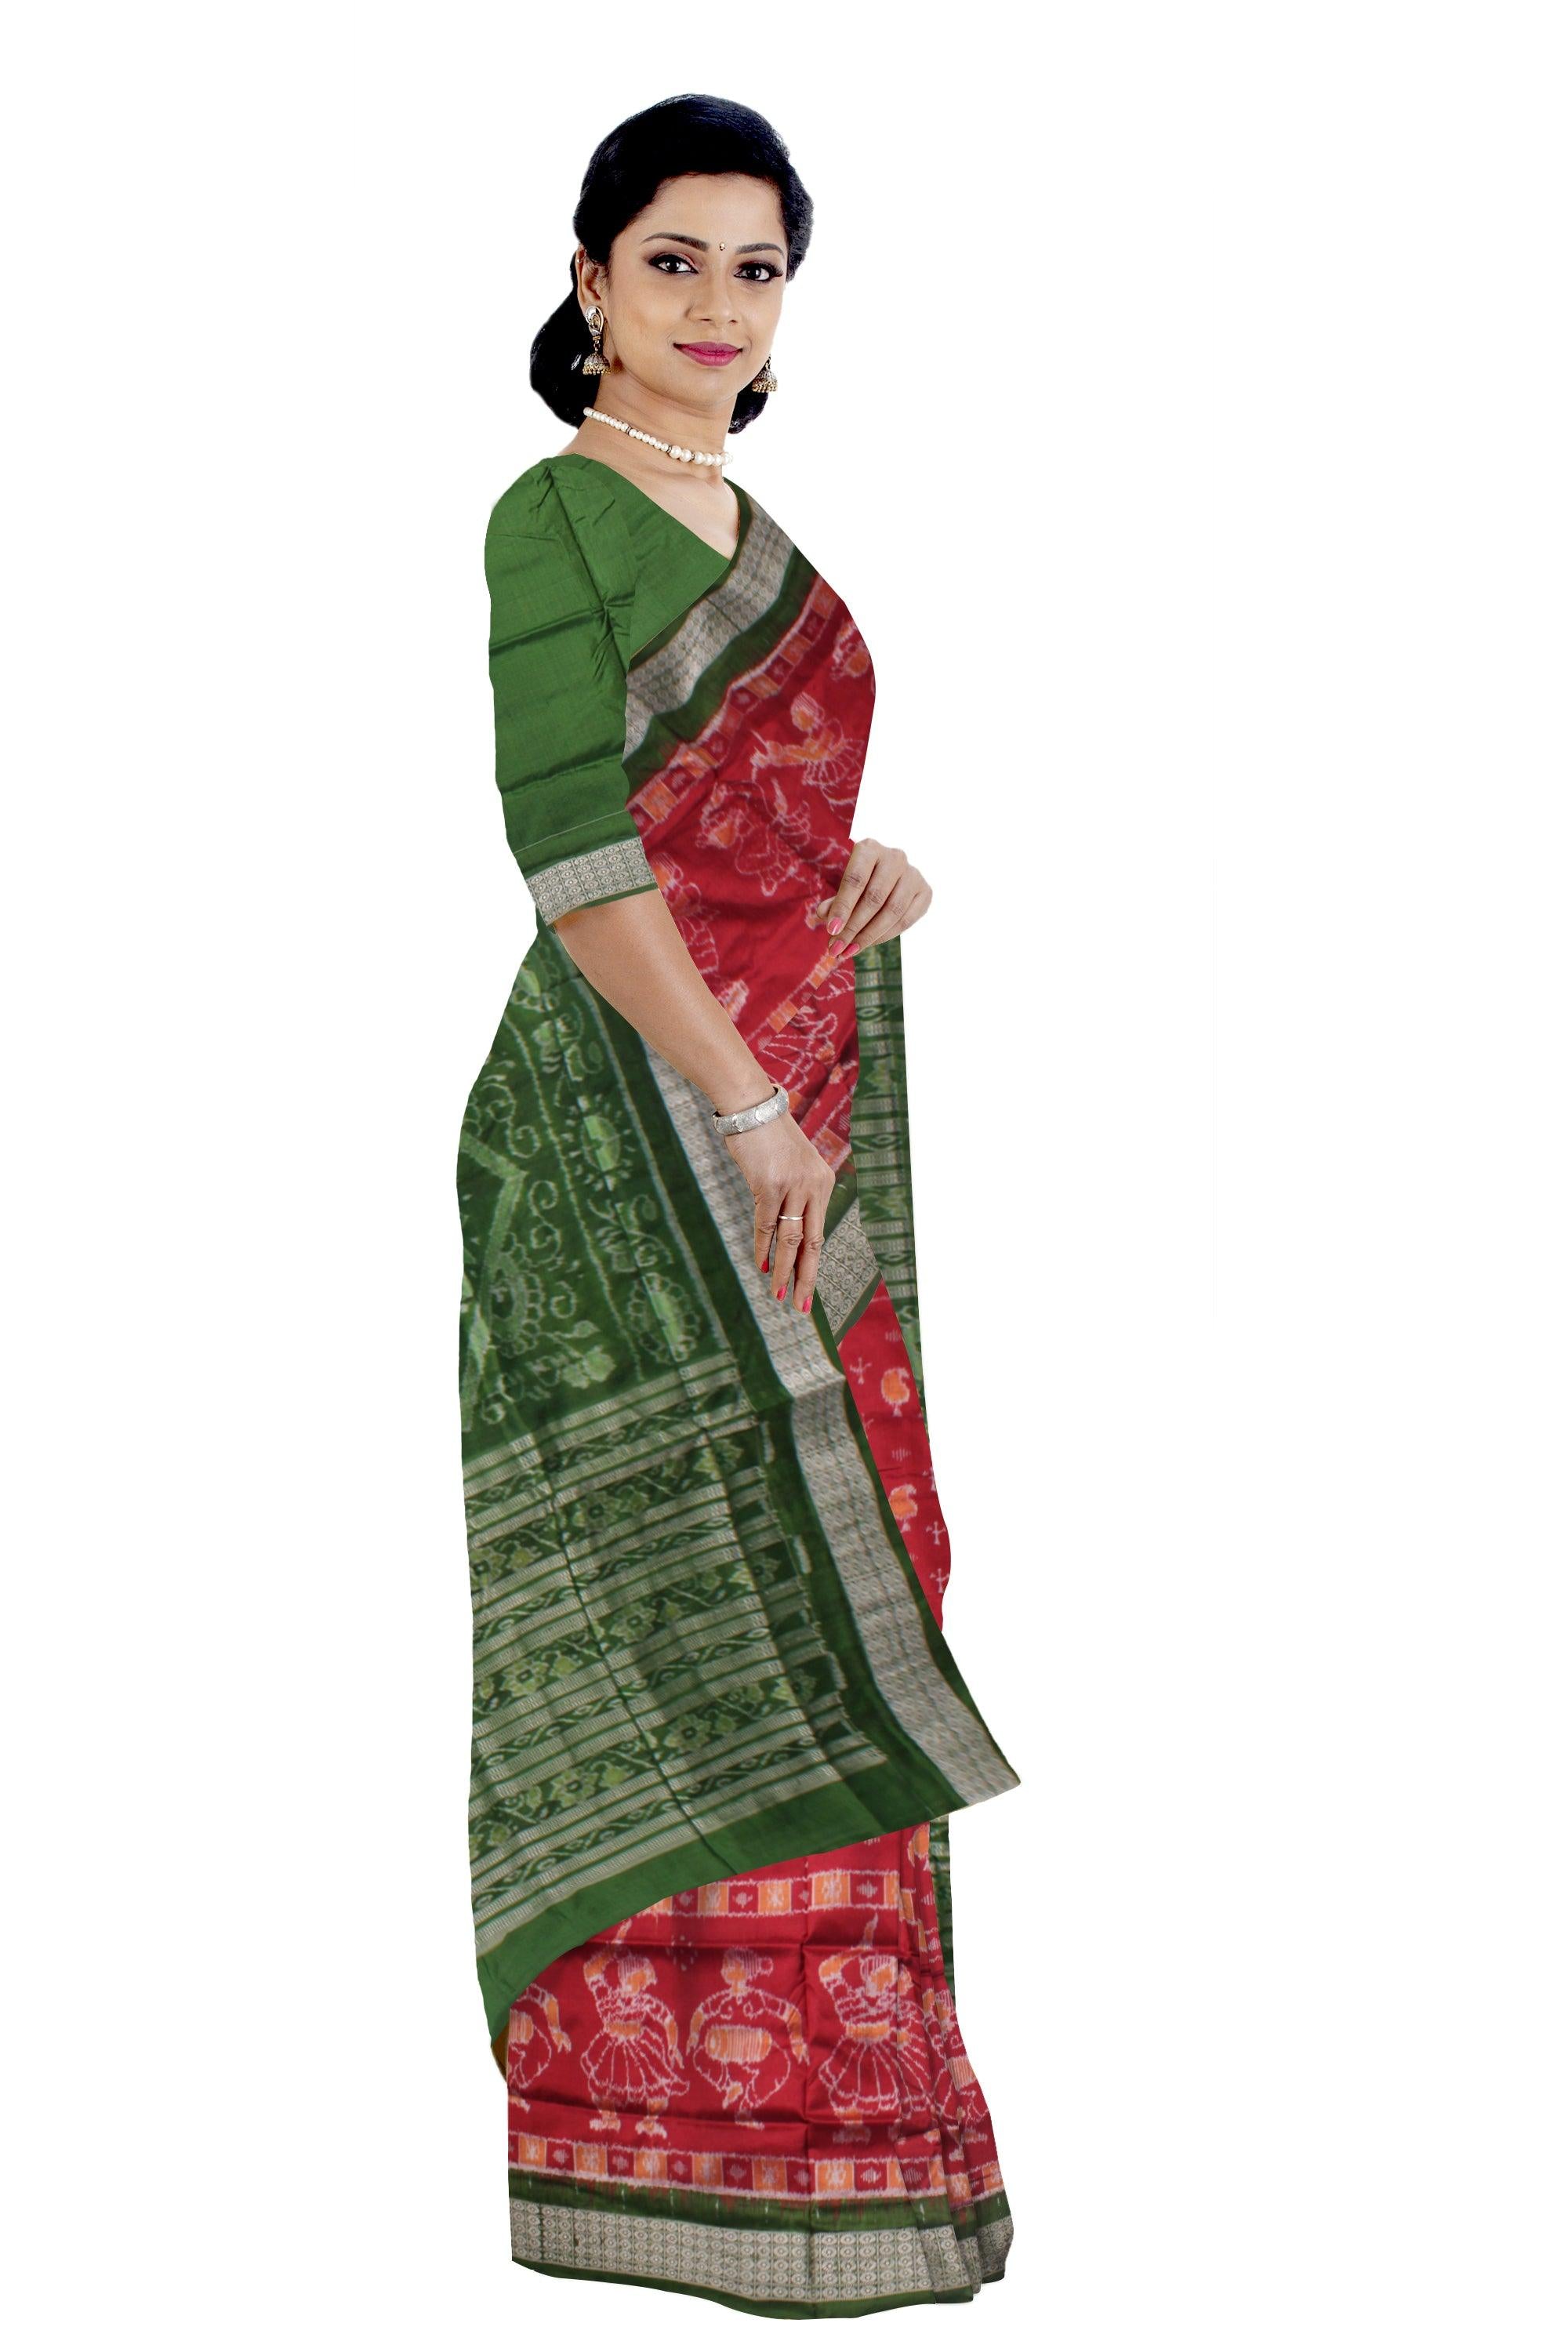 NARTAKI PATTERN PURE SILK SAREE IS MAROON AND GREEN COLOR BASE, ATTACHED WITH MATCHING BLOUSE PIECE. - Koshali Arts & Crafts Enterprise